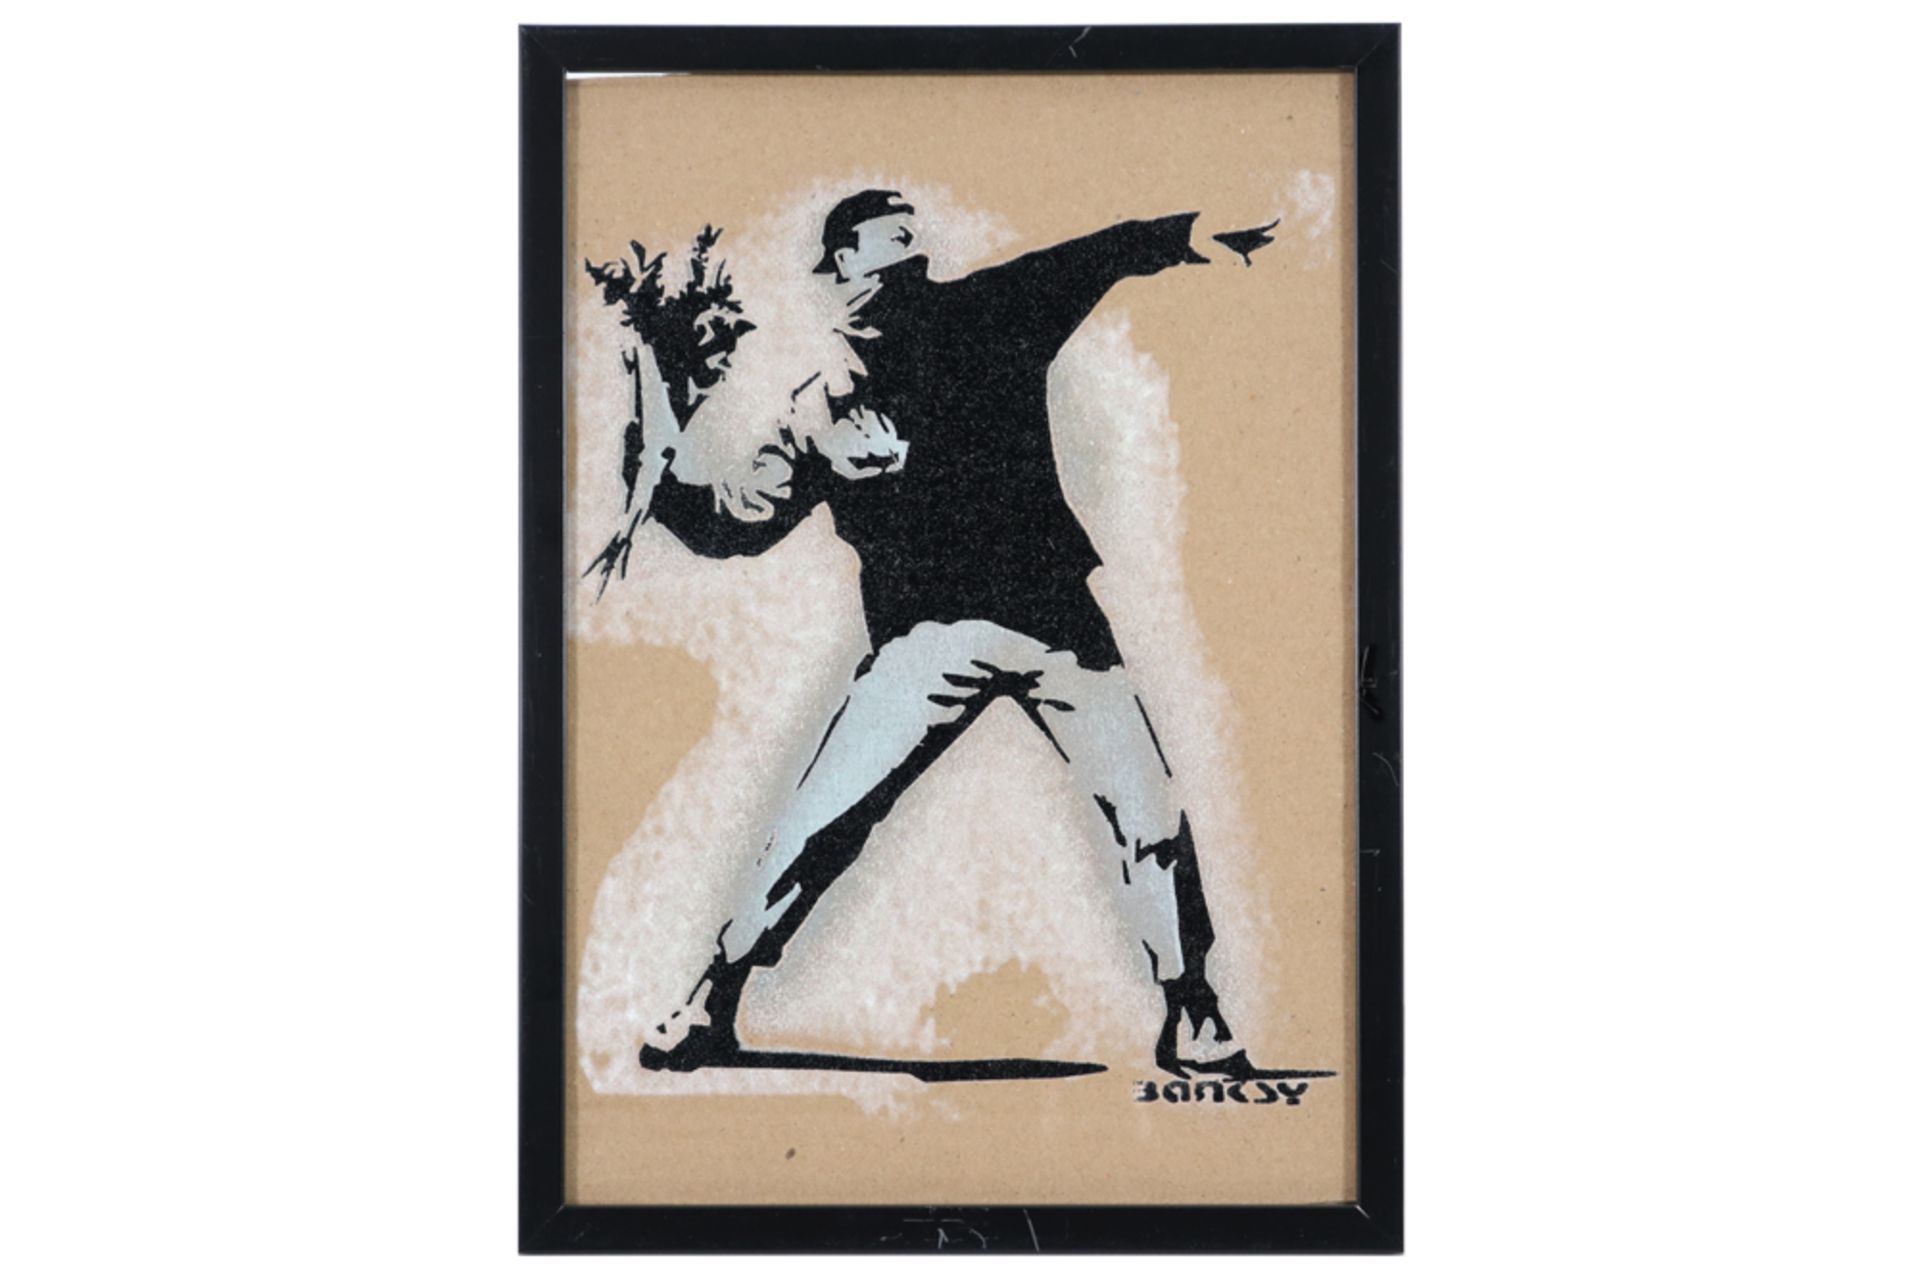 Banksy "Flower Bomber" stencil on carboard from the "Enjoy your free art" series - with on the